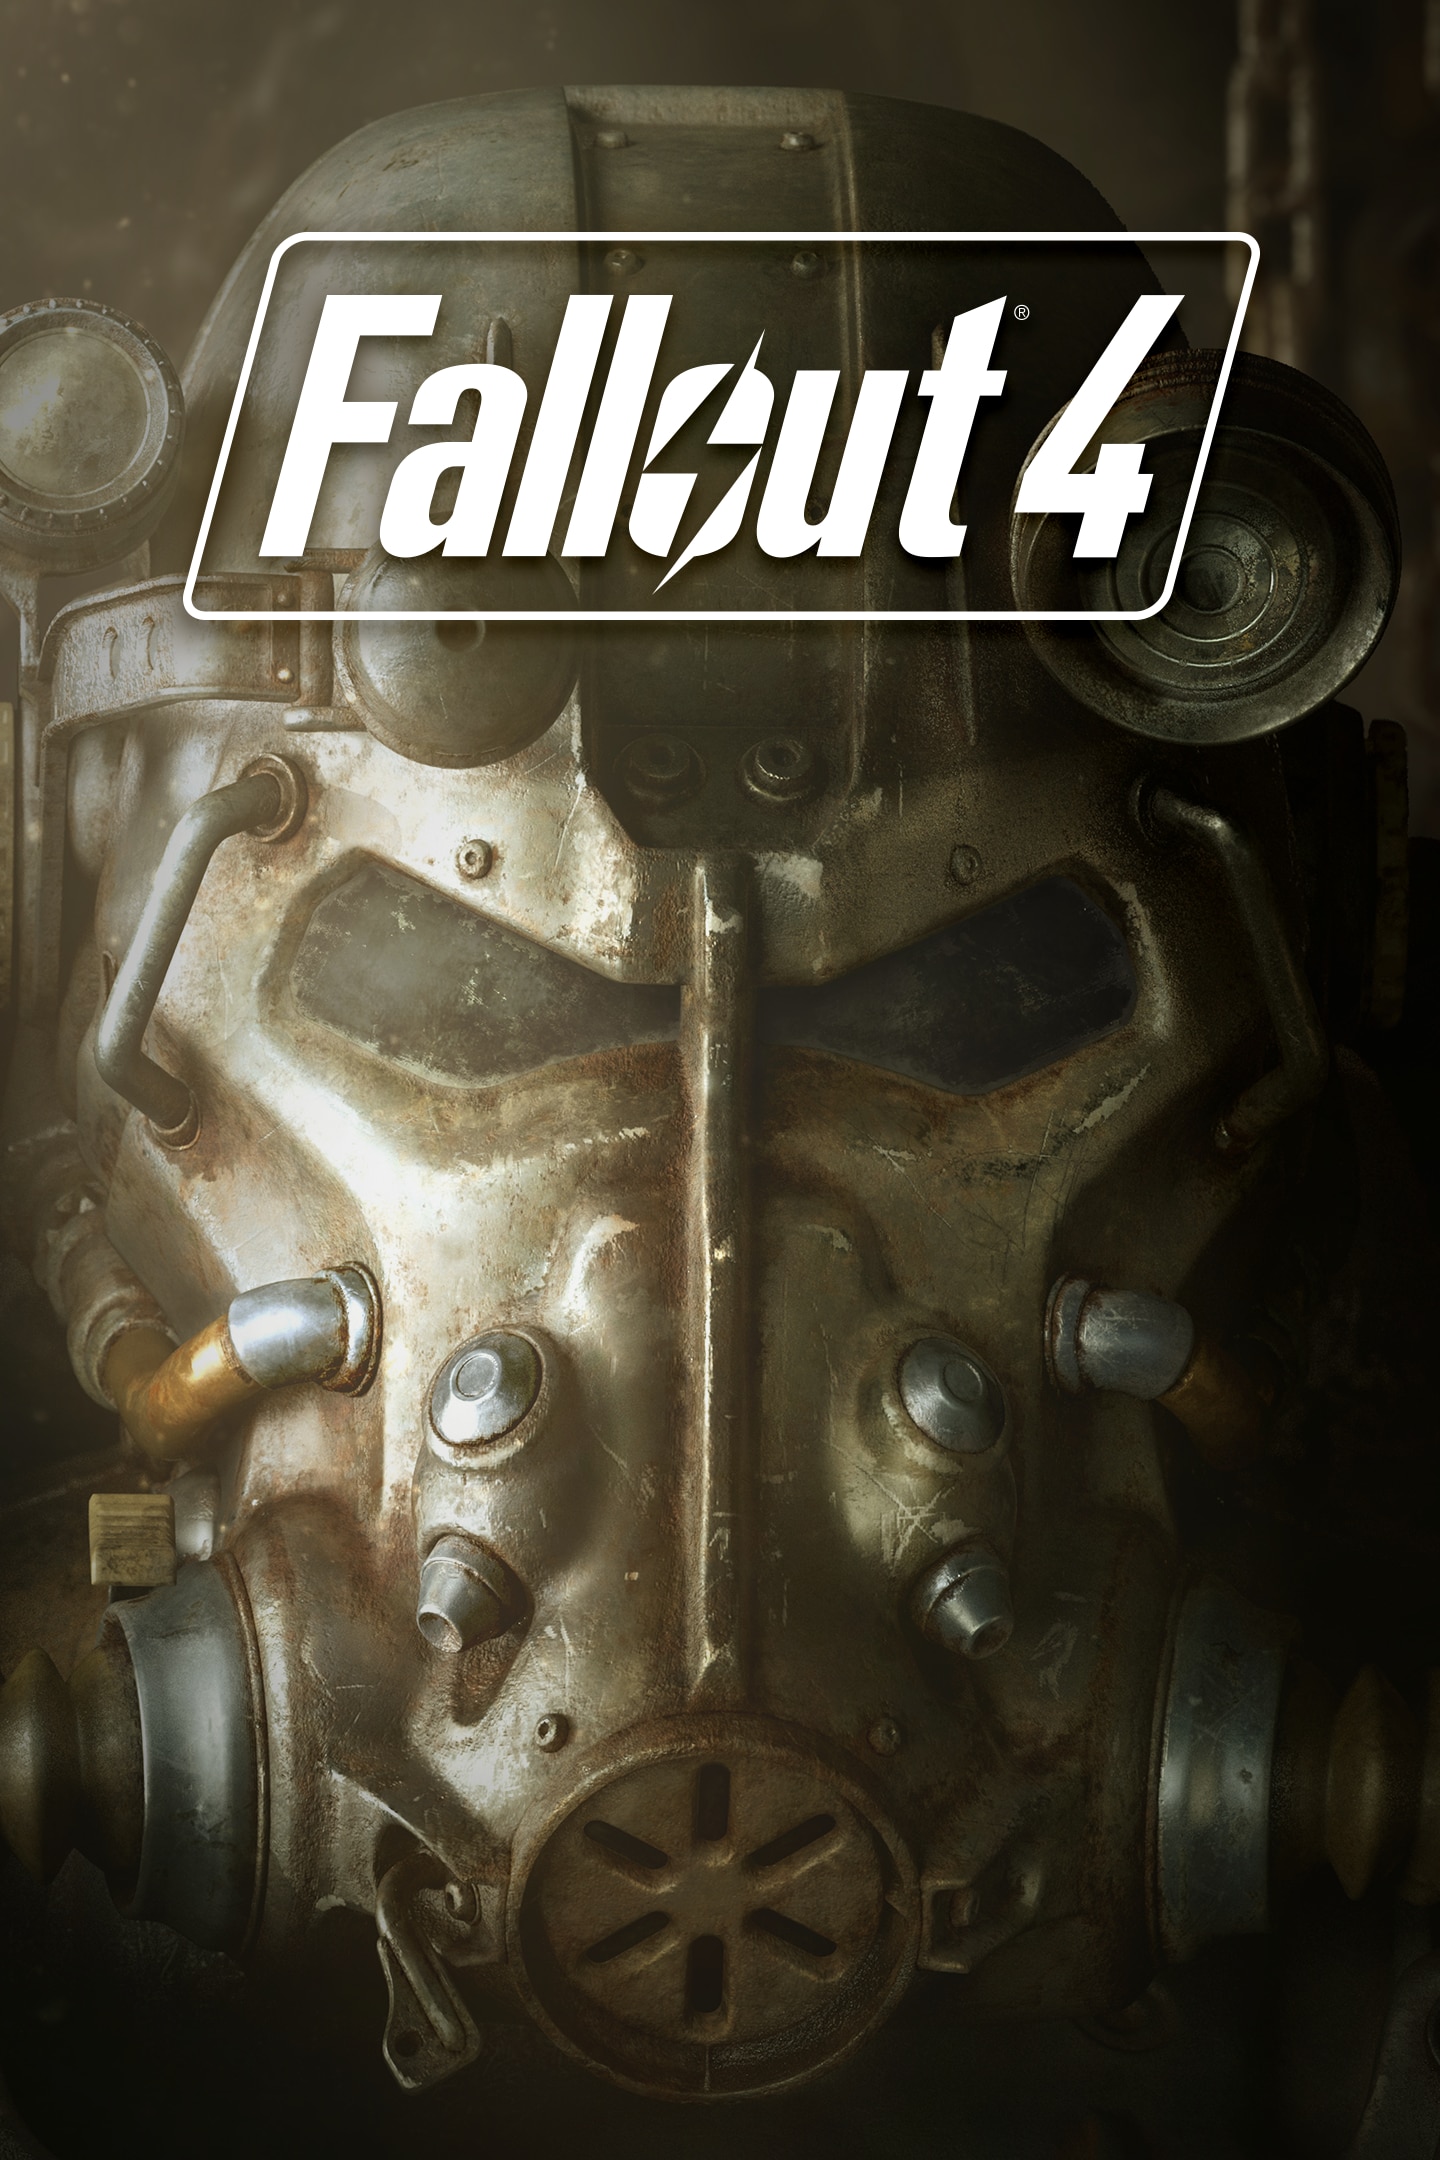 what do you gtet with fallout 4 goty edition